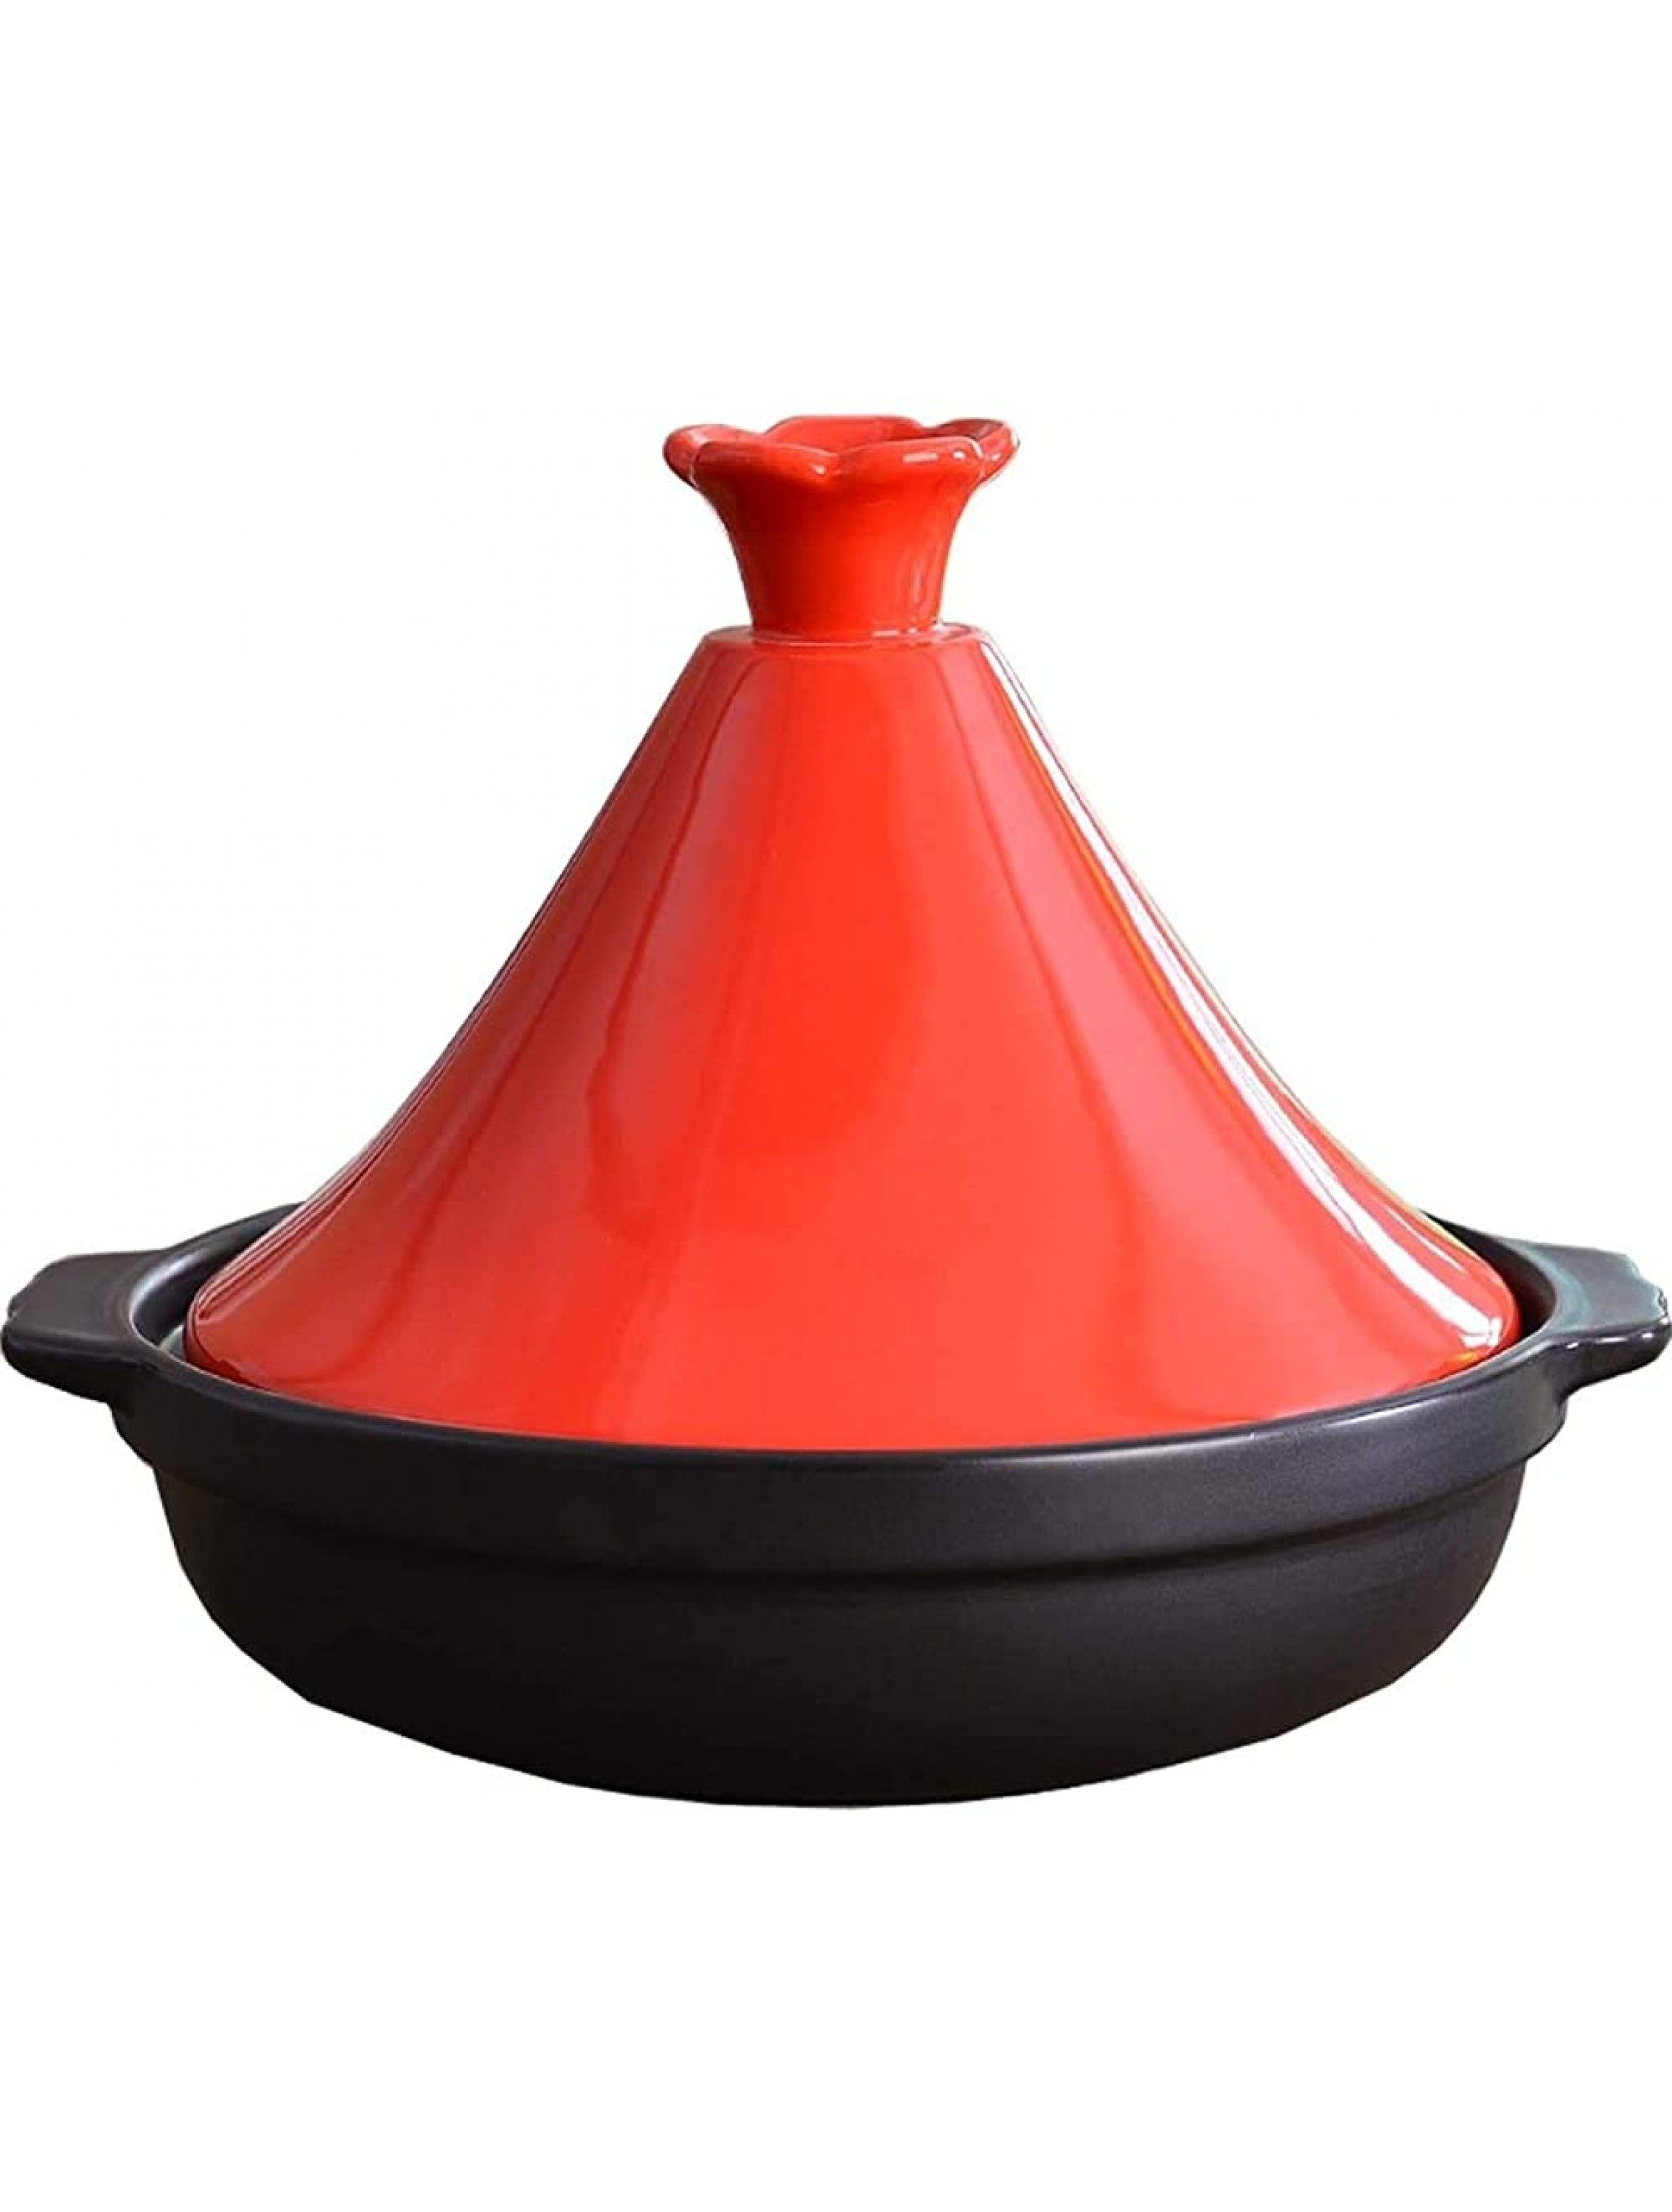 Chinese pottery -Cooker Pot 30Cm Tagine Cooking Pot with Lid|Smoke-Free Non-Stick Cookware Saucepan|for Most Open Flame Cookware Color : A - B5WZ92NKG